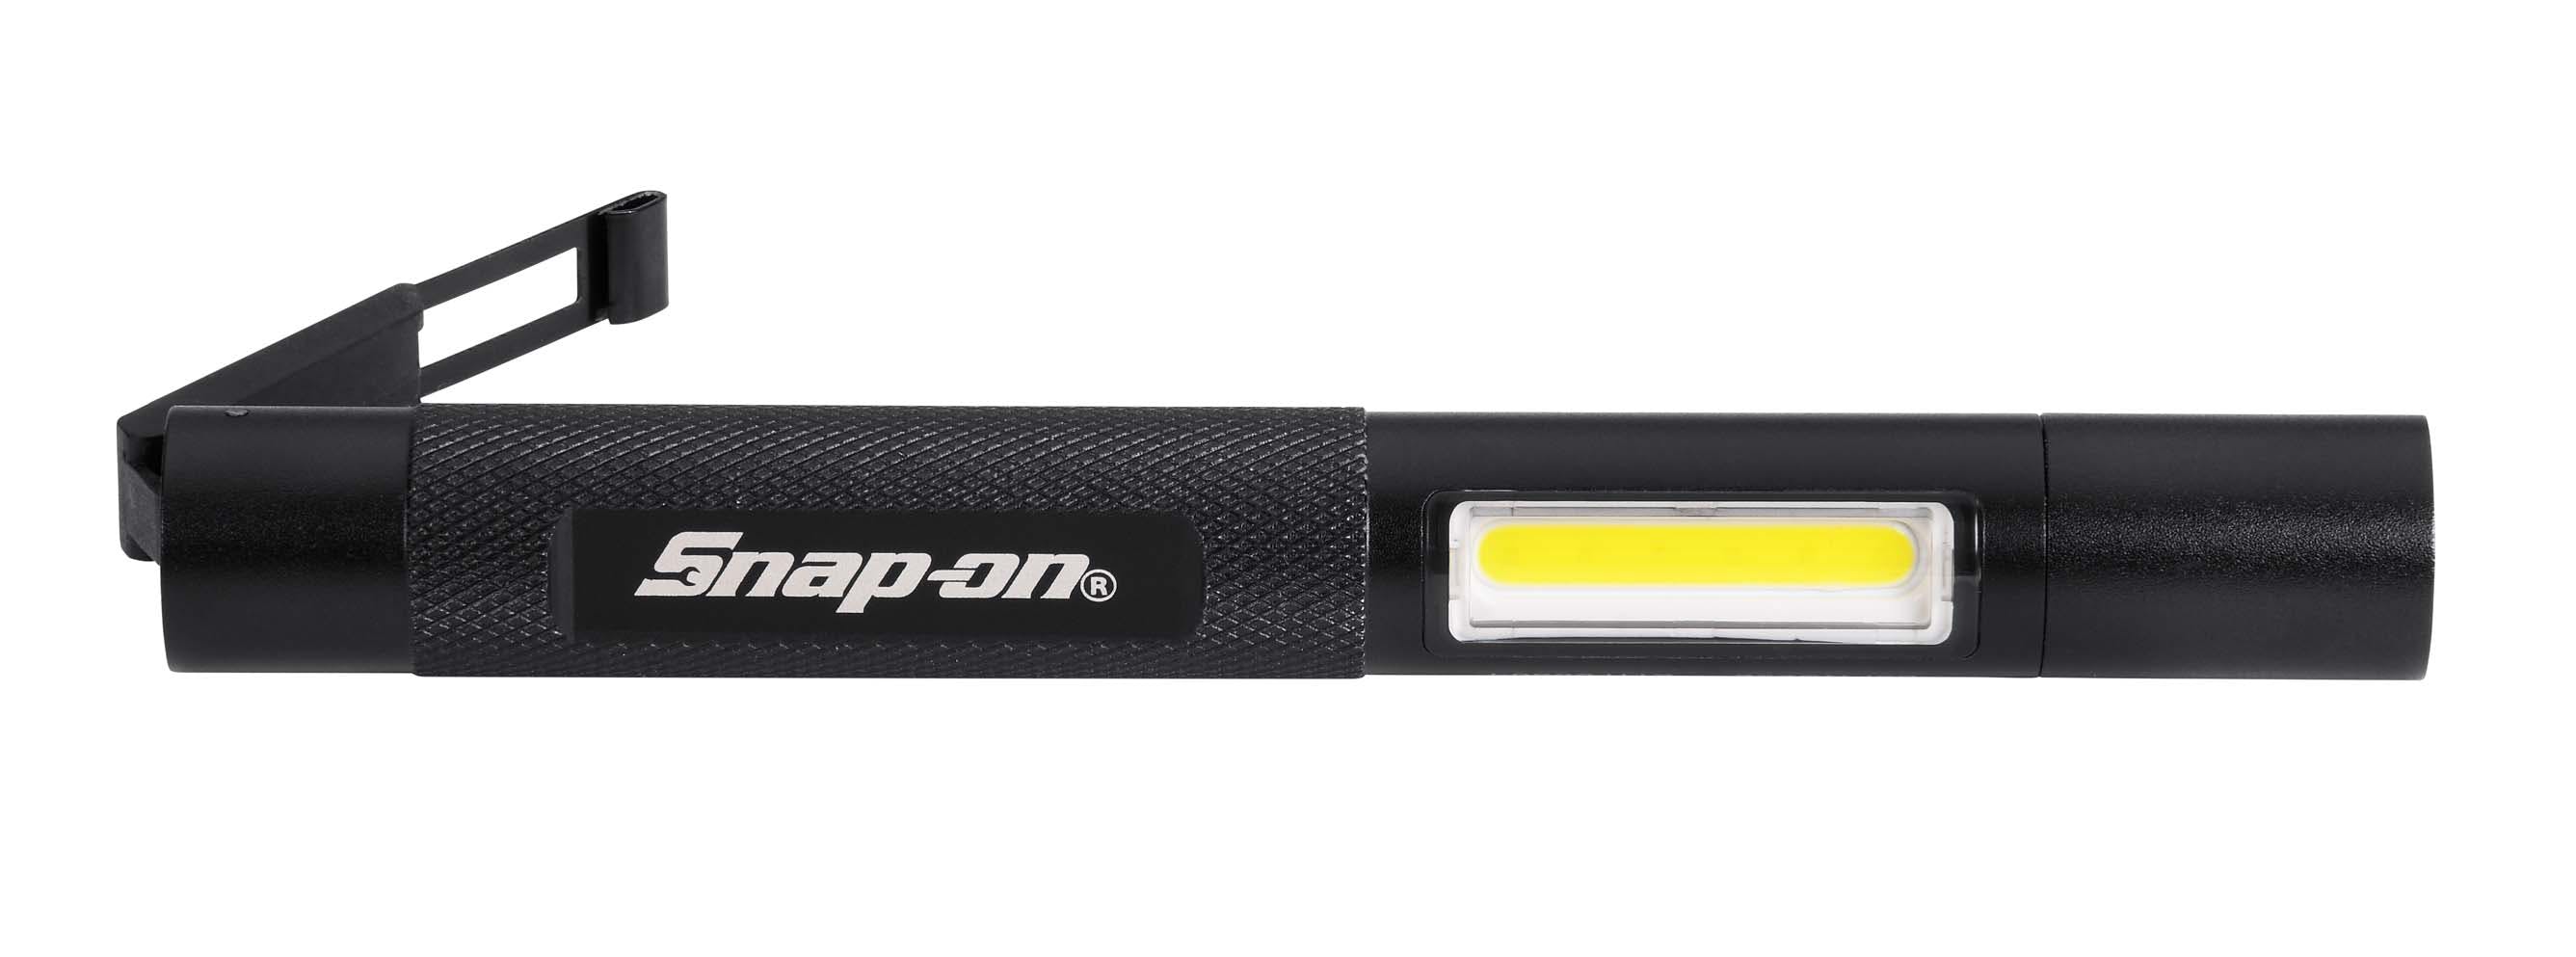 New Snap On 300Lm Rechargeable penlight pocket light 4 colors W/Clip+Magnet 